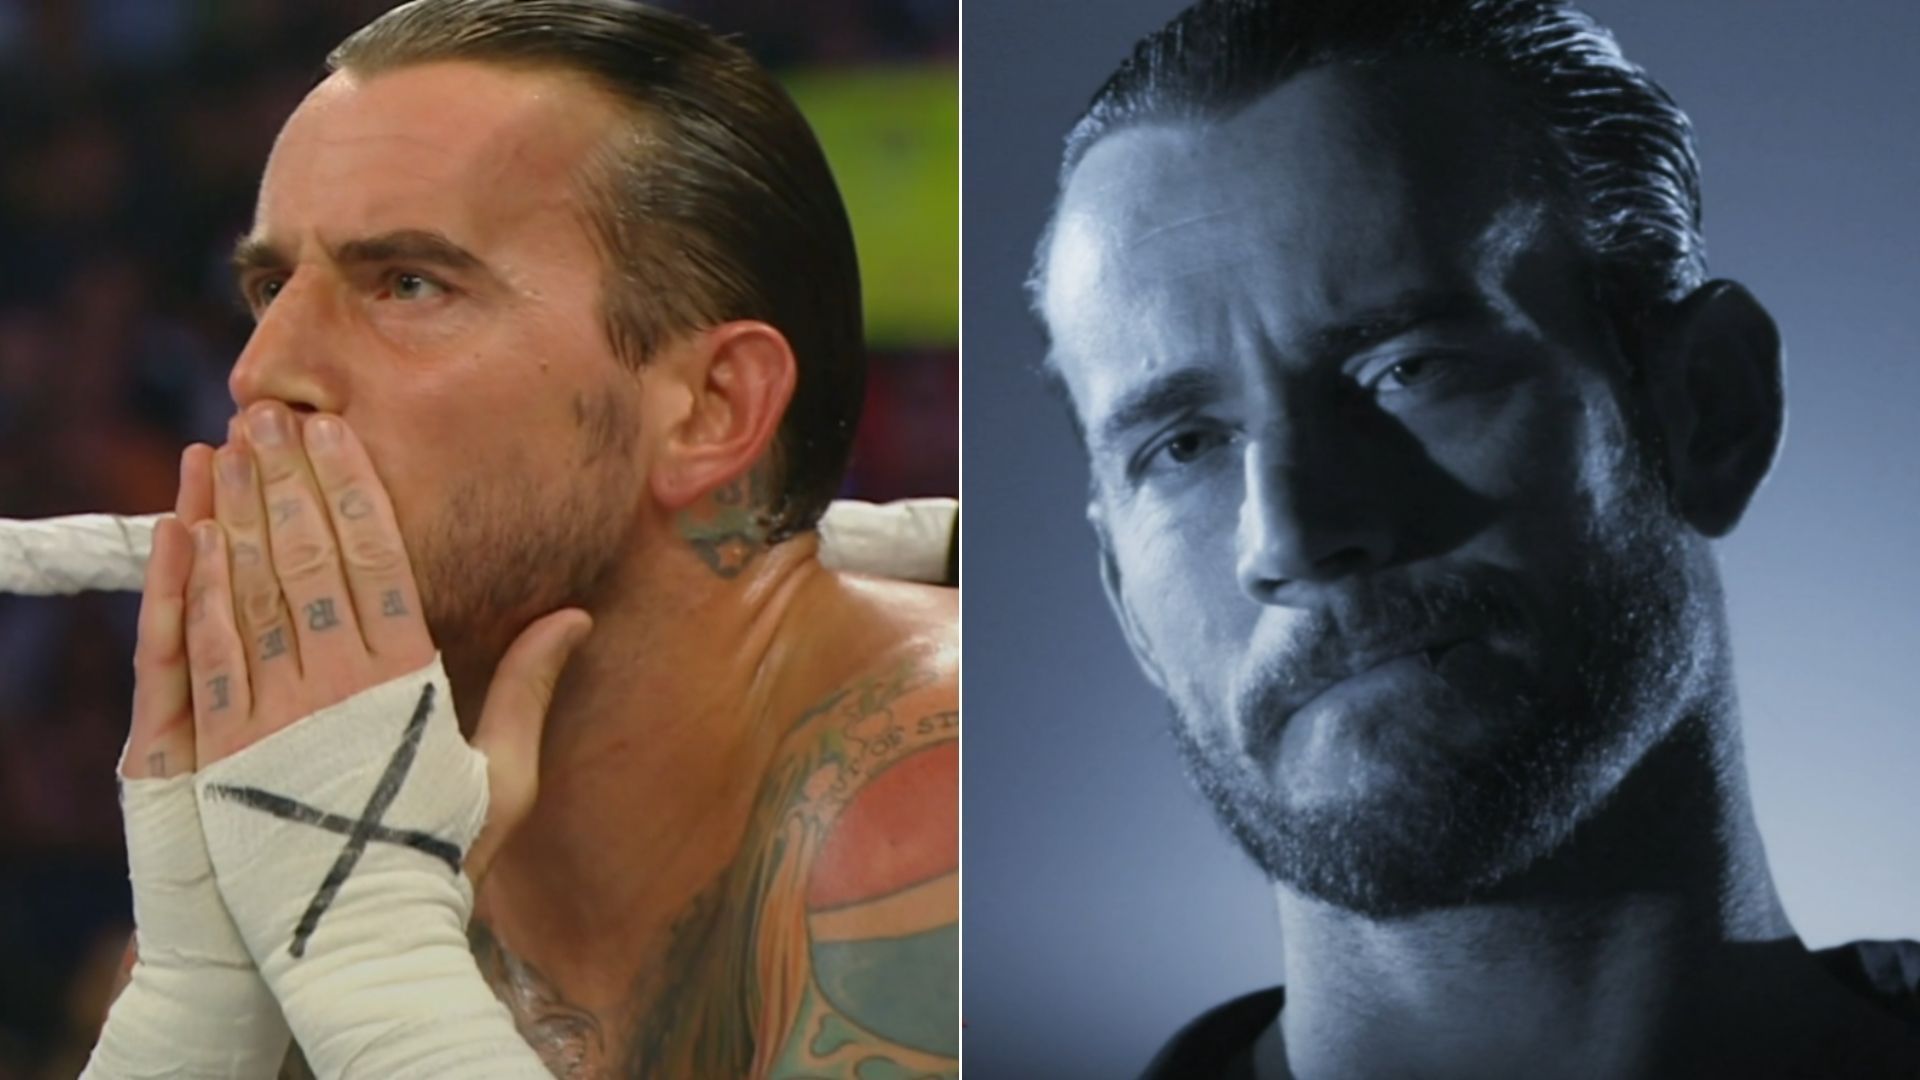 CM Punk worked for WWE between 2005 and 2014